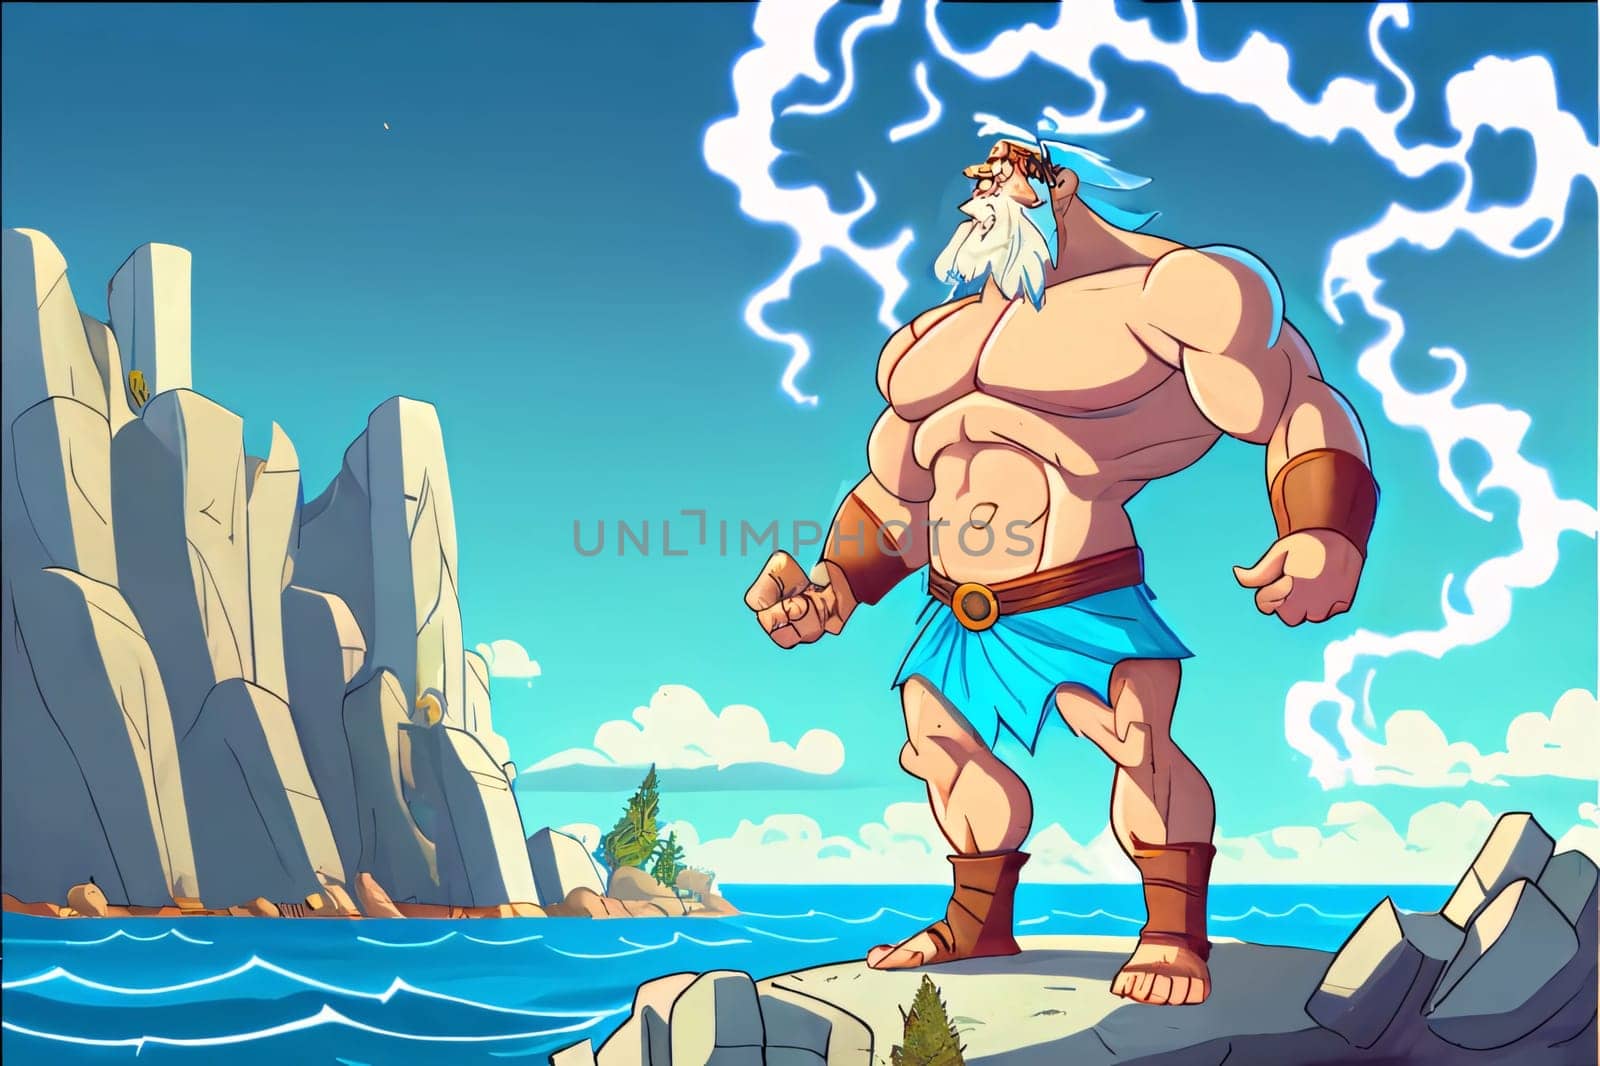 Banner: Cartoon illustration of a strong barbarian warrior standing on a rock.